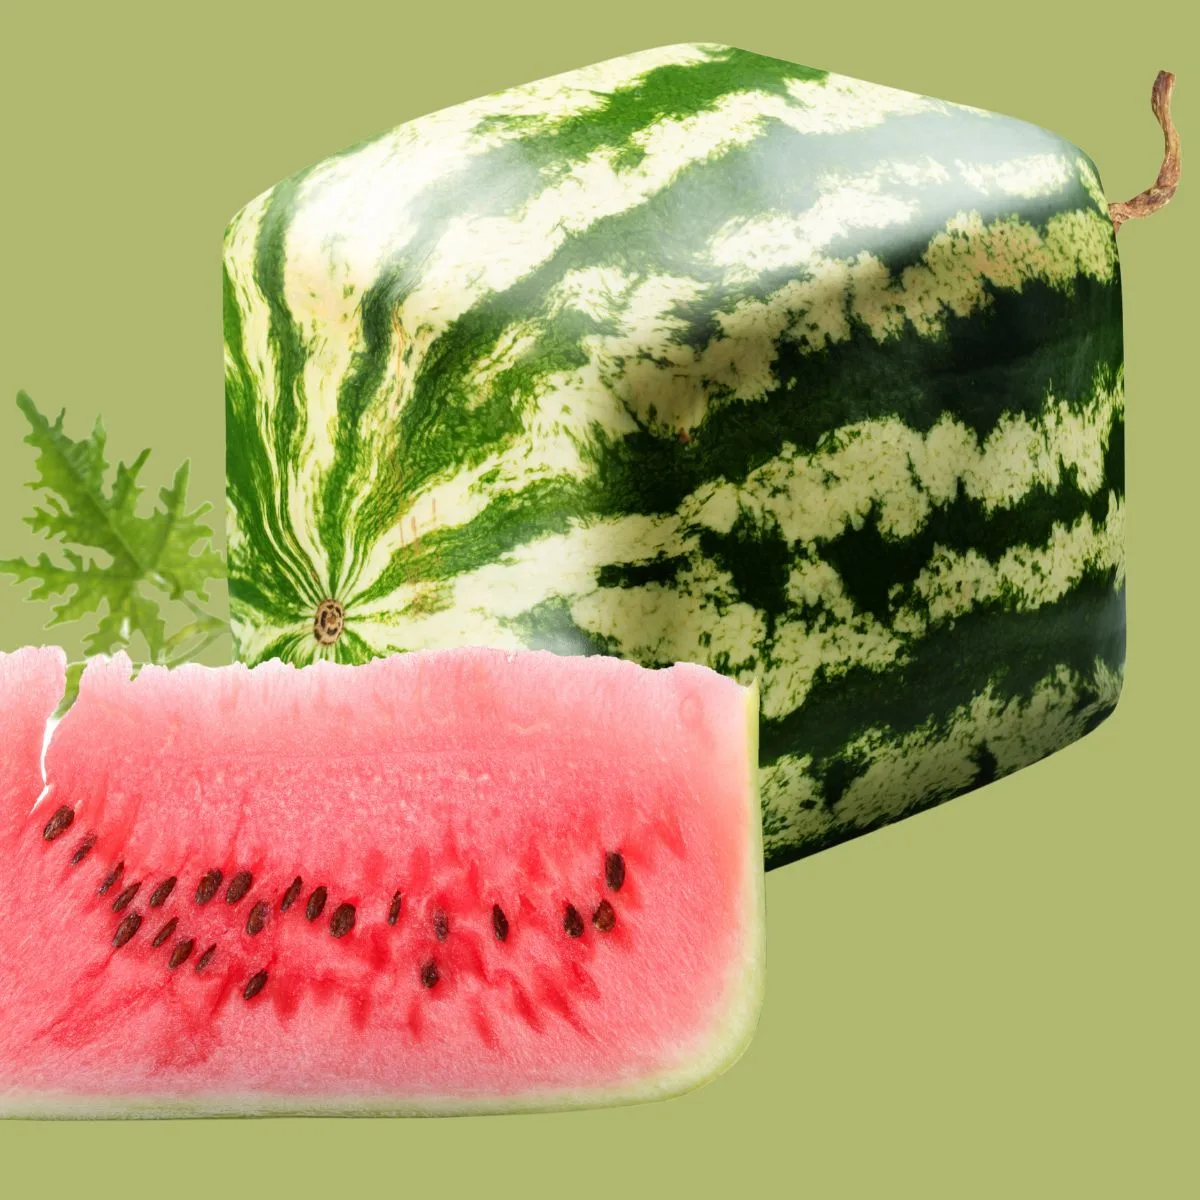 A slice of square watermelon in front of a whole cube-shaped melon. 